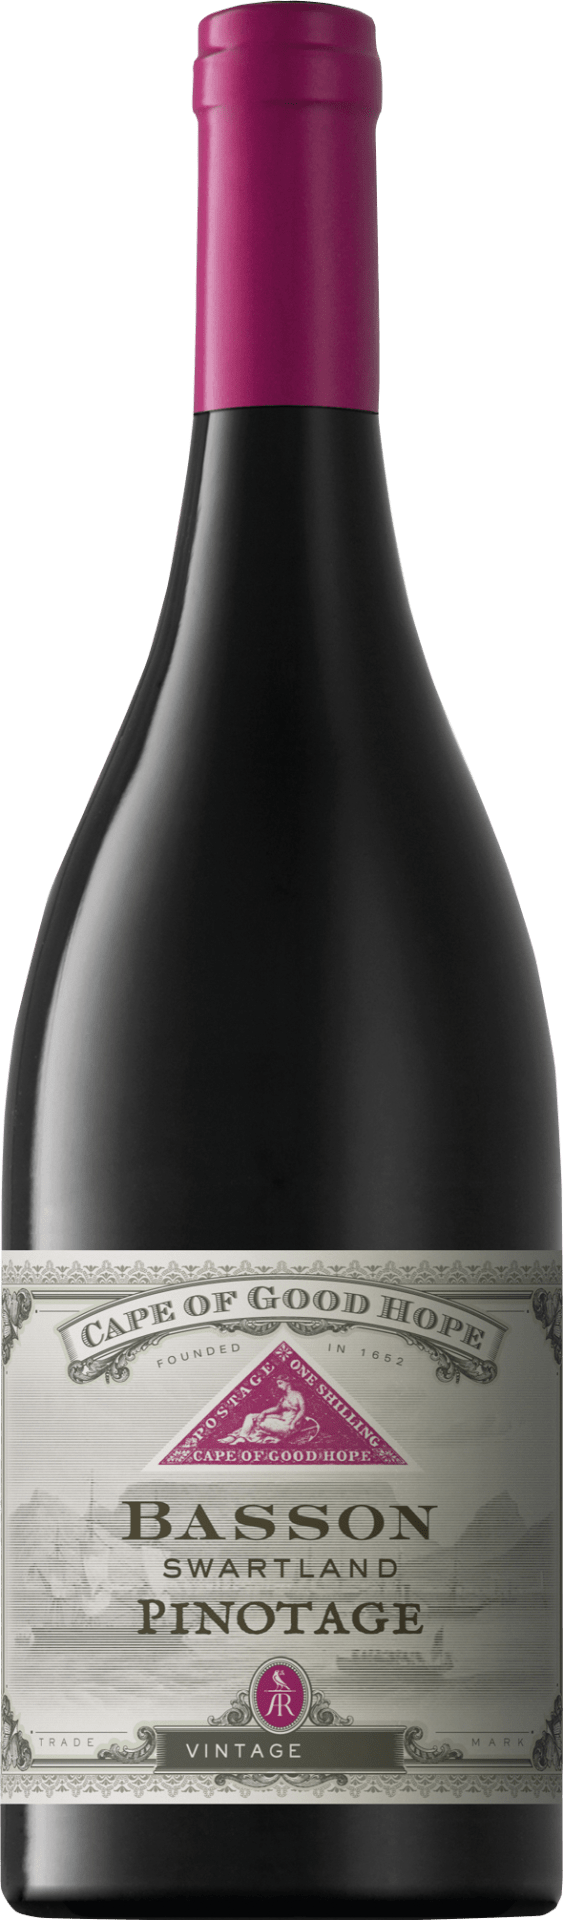 Cape of Good Hope Basson Pinotage